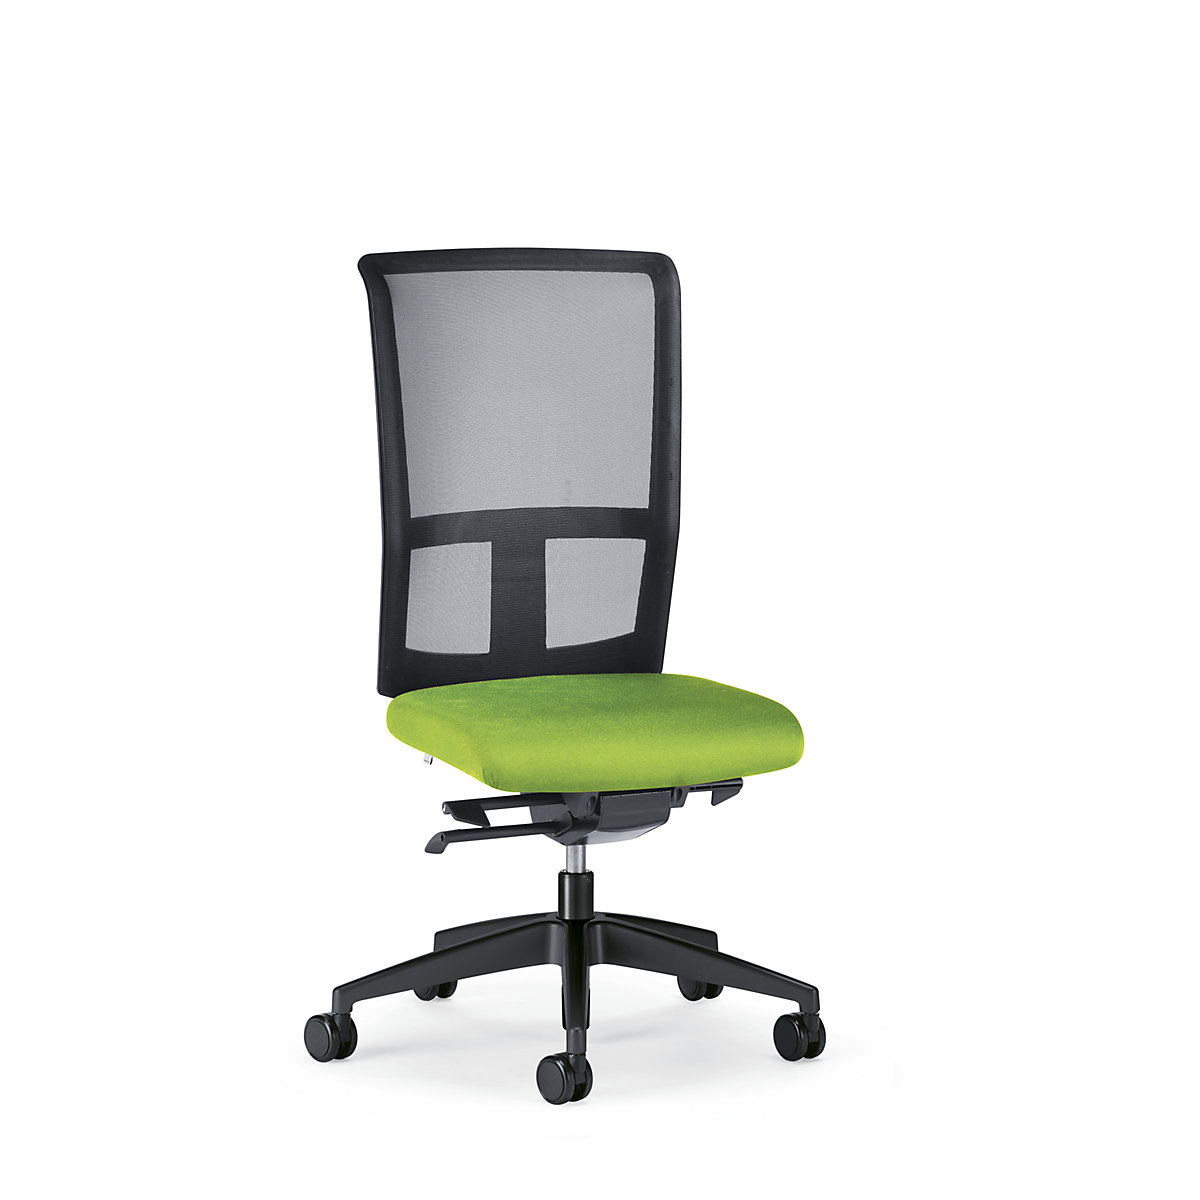 GOAL AIR office swivel chair, back rest height 545 mm – interstuhl, black frame, with hard castors, yellow green, seat depth 410 mm-3